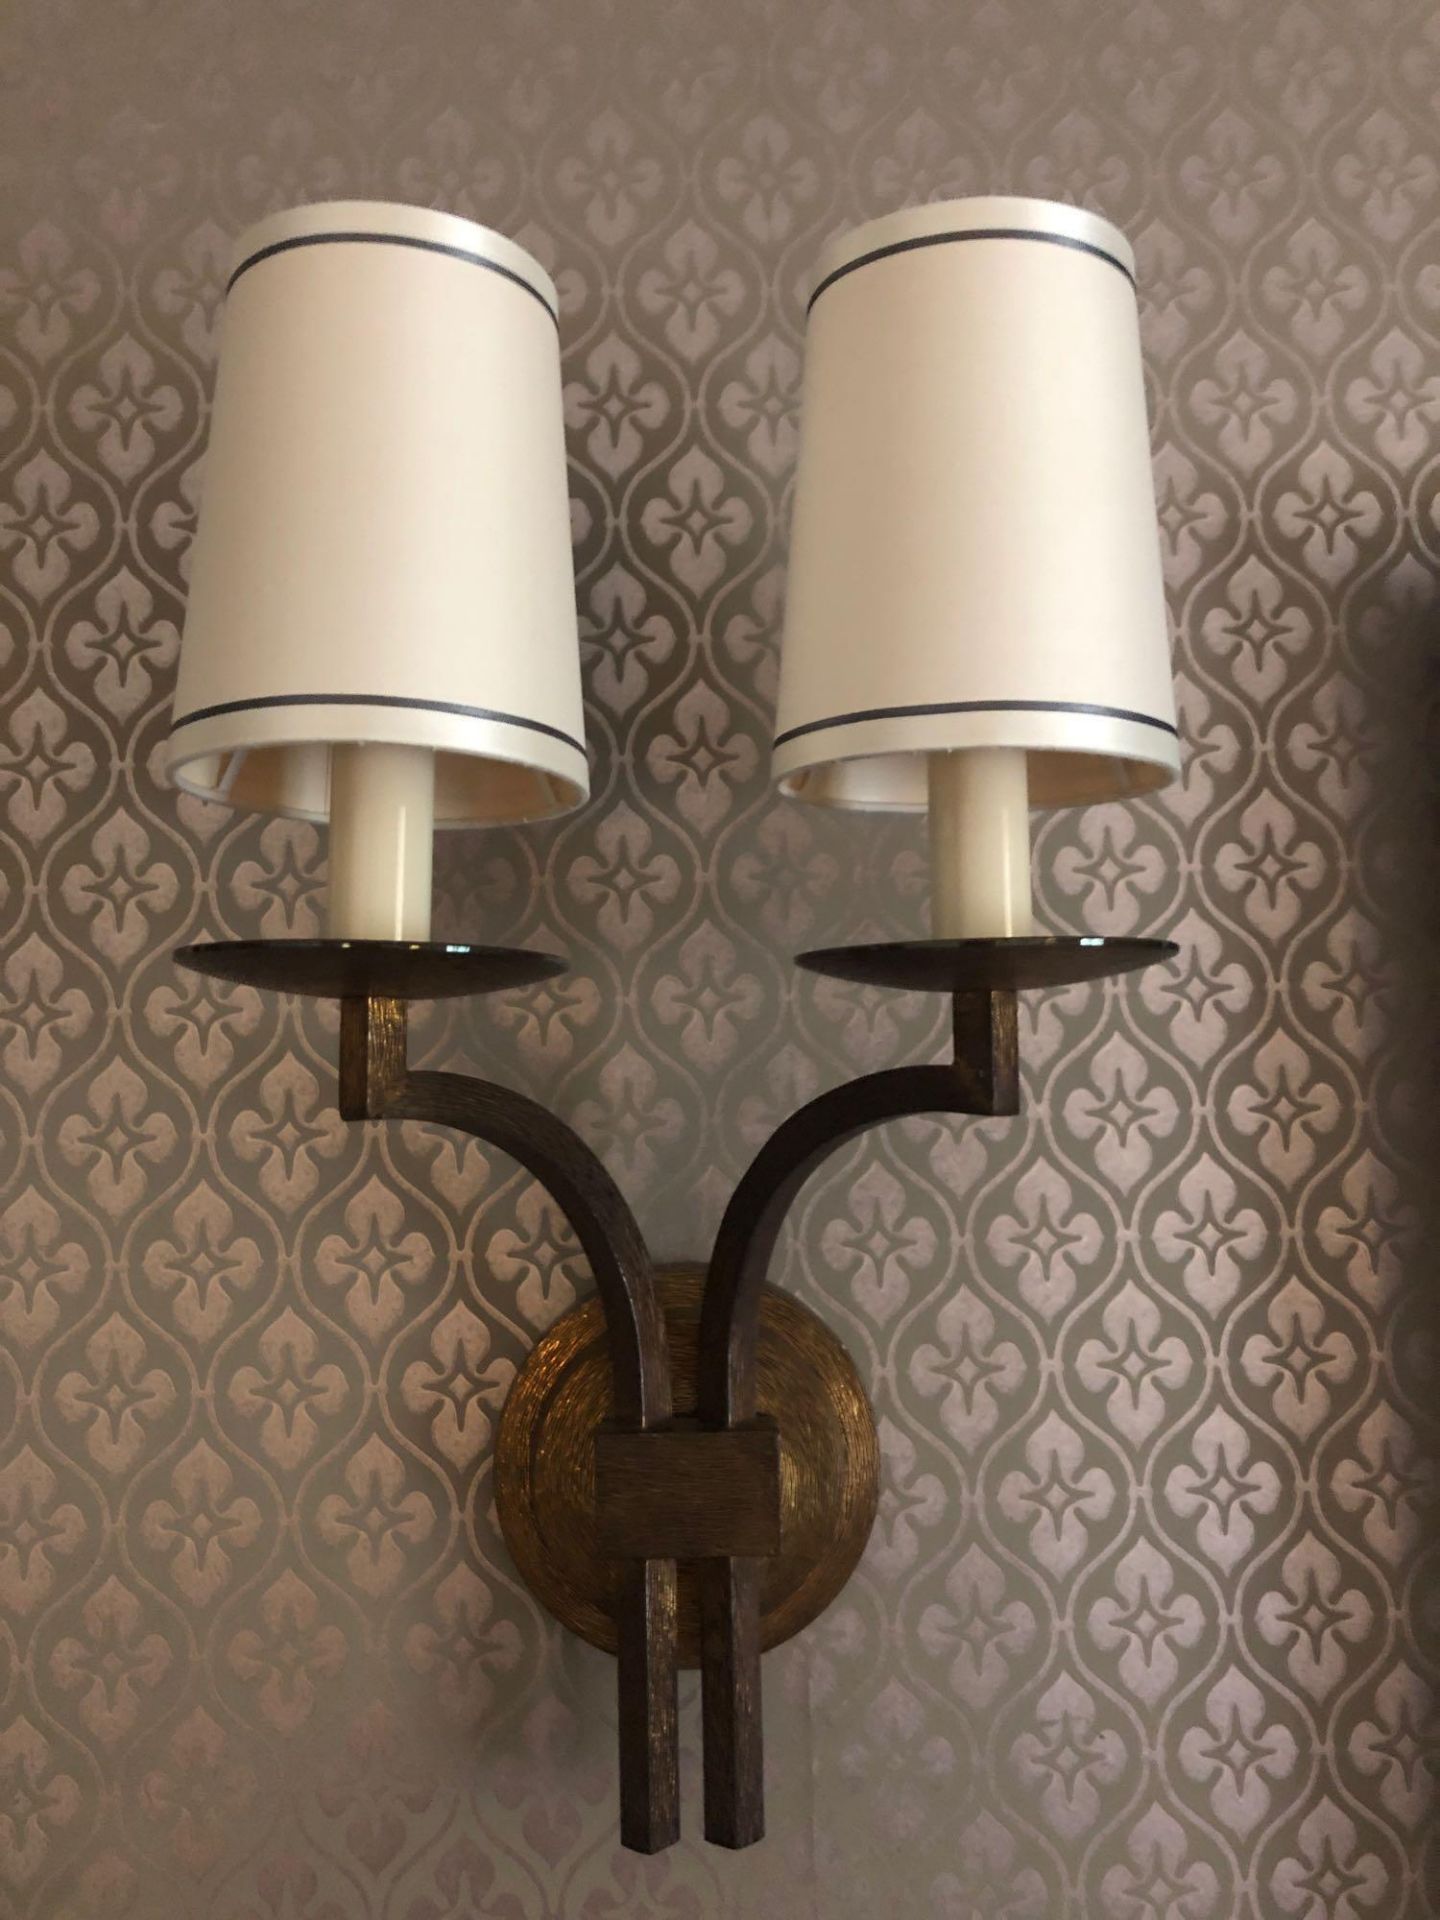 A Pair Of Dernier And Hamlyn Twin Arm Antique Bronzed Wall Sconces With Shade 51cm (Room 514) - Bild 2 aus 2